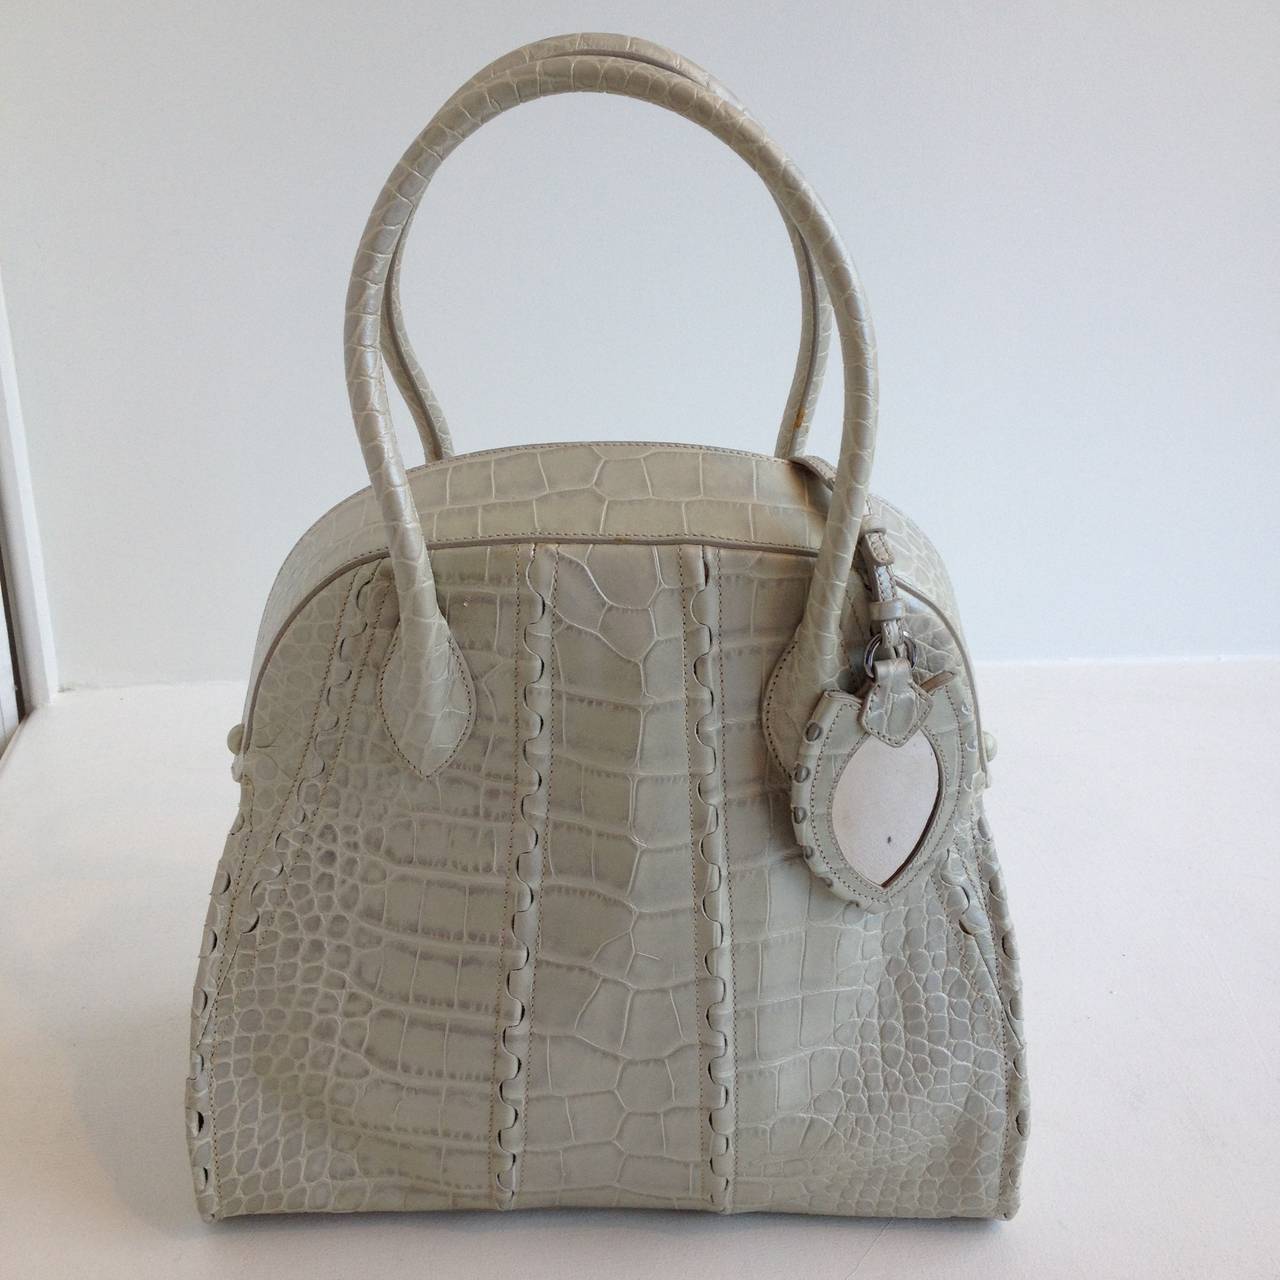 This piece by Azzedine Alaia certainly makes a statement - in gorgeous reptile embossed leather, it's a timelessly luxurious piece. Two curved handles rise above the top of the bag, while the shape is compact but spacious. The interior is lined in